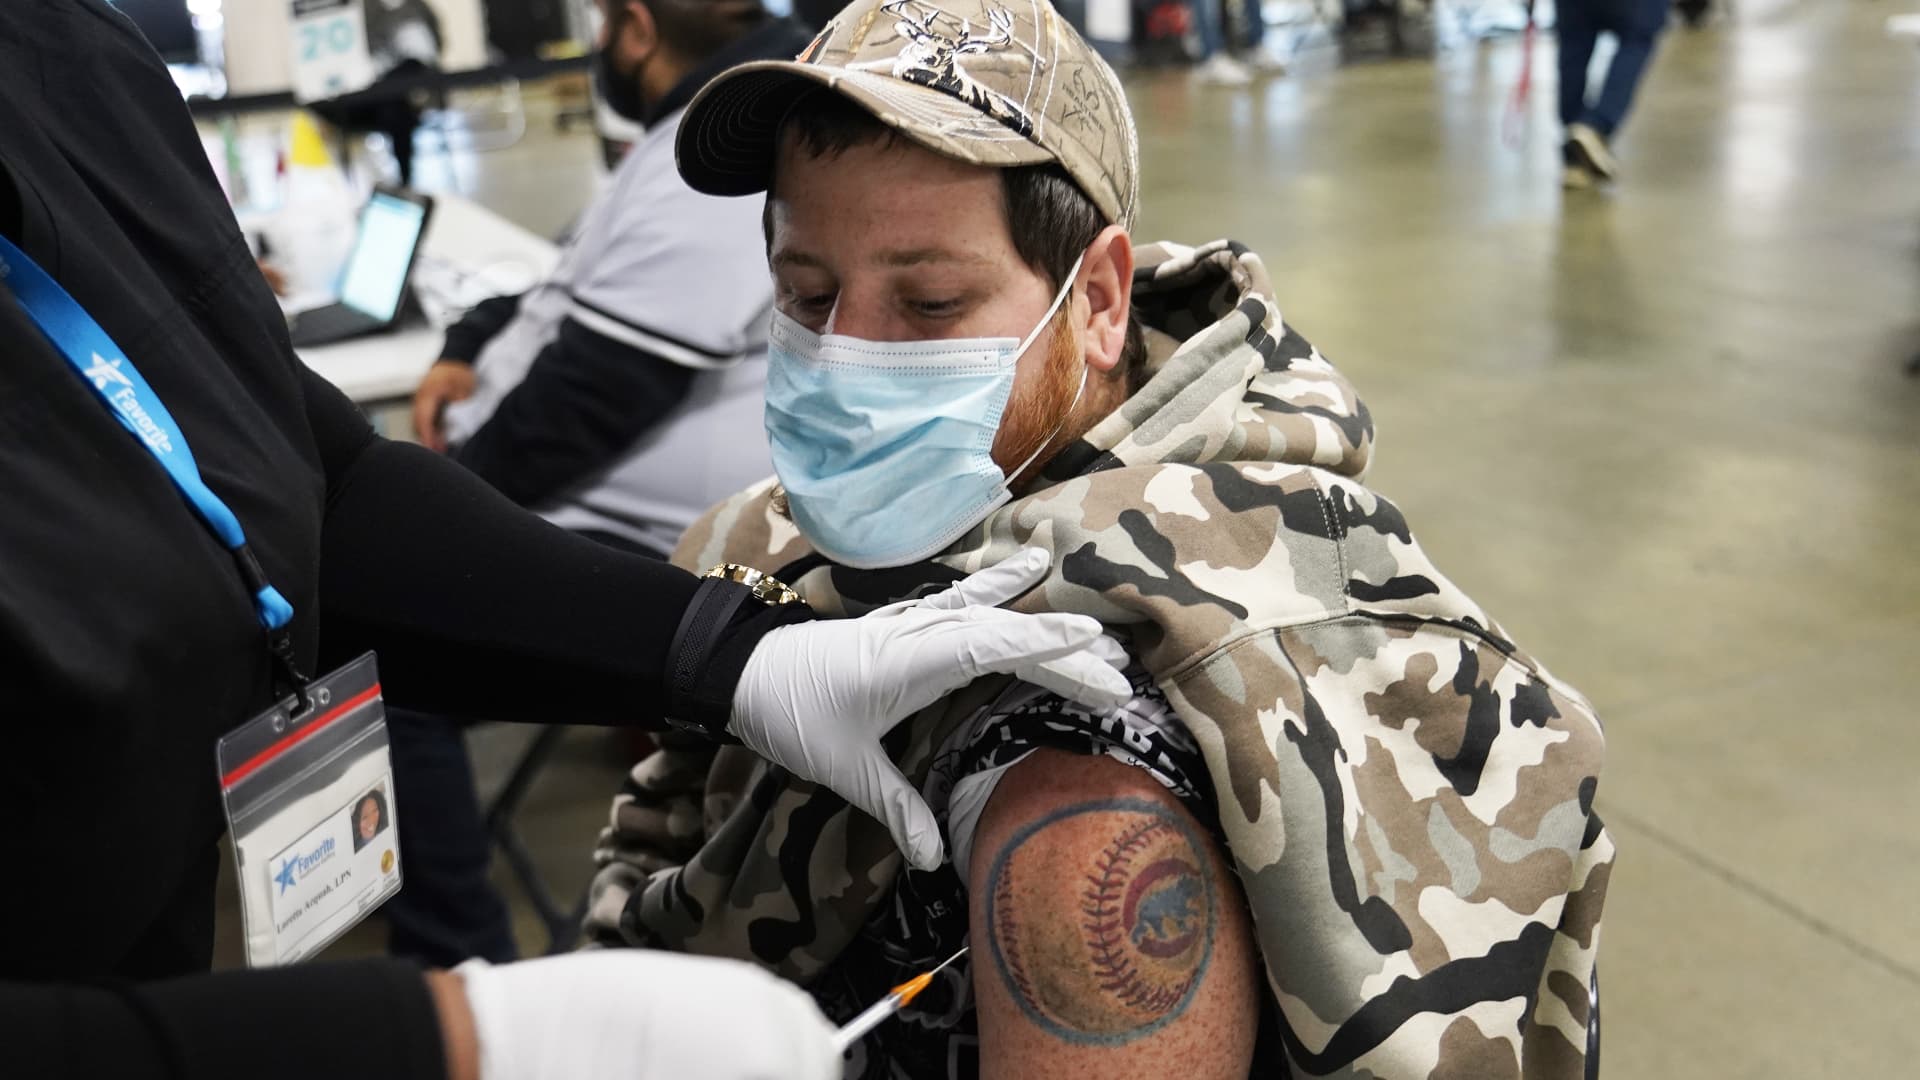 Kevin Hensley is given the J&J COVID vaccine in coordination with the Cook County Health Dept. and the Chicago White Sox. Recipients were given a $25 card for discounts on concessions before Game One of a doubleheader at Guaranteed Rate Field on May 29, 2021 in Chicago, Illinois.